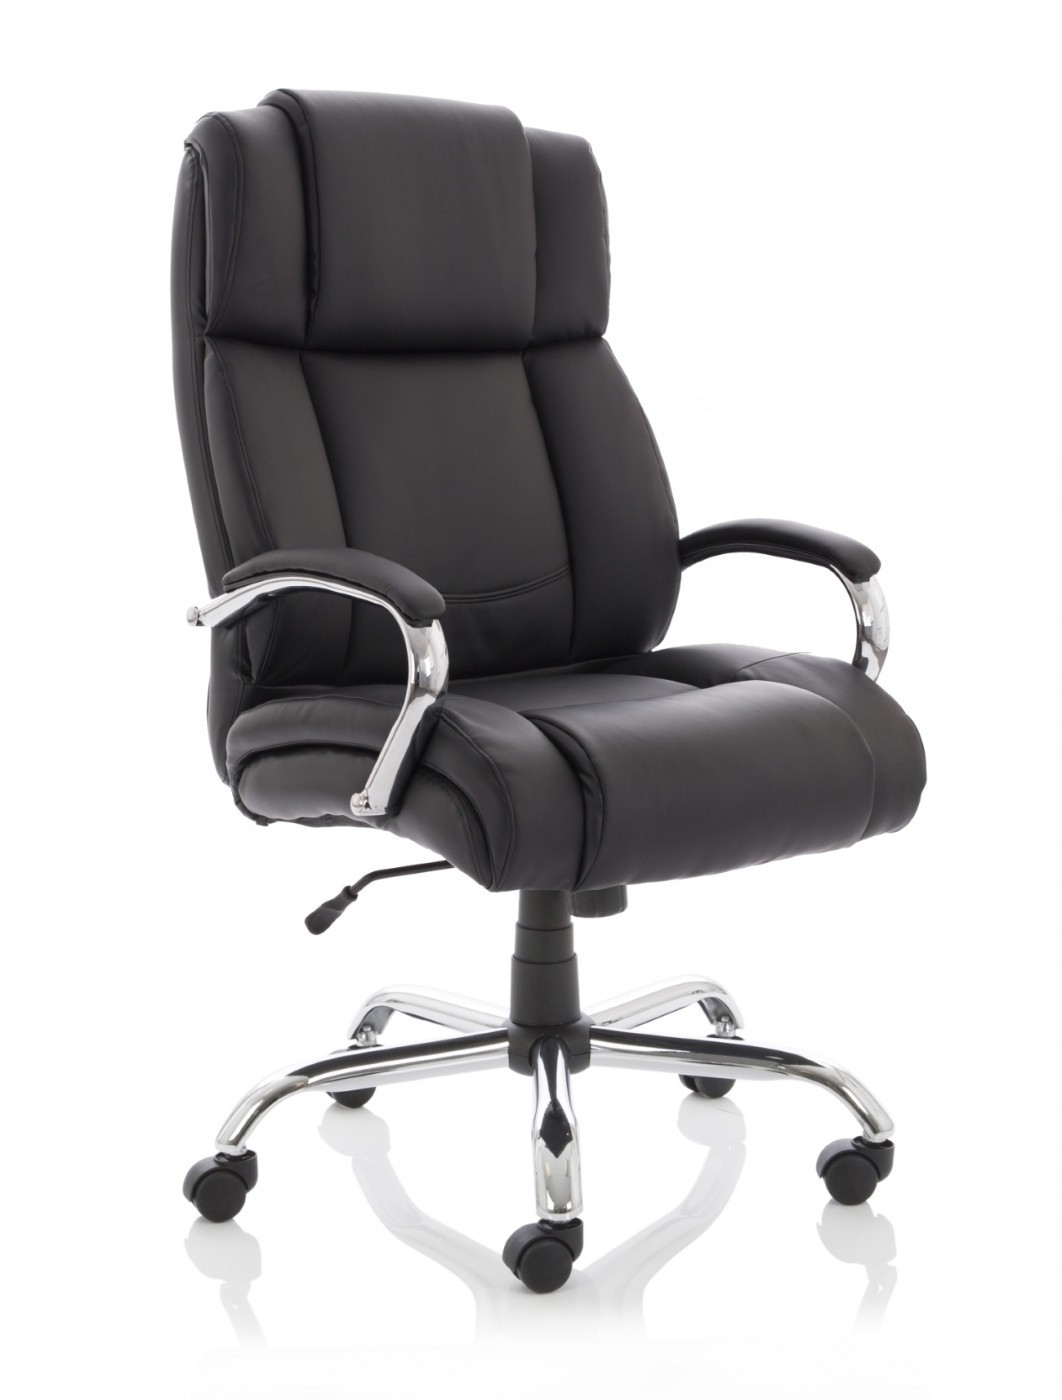 Dynamic Texas Heavy Duty Leather Office Chair Ex00011 121 Office Furniture